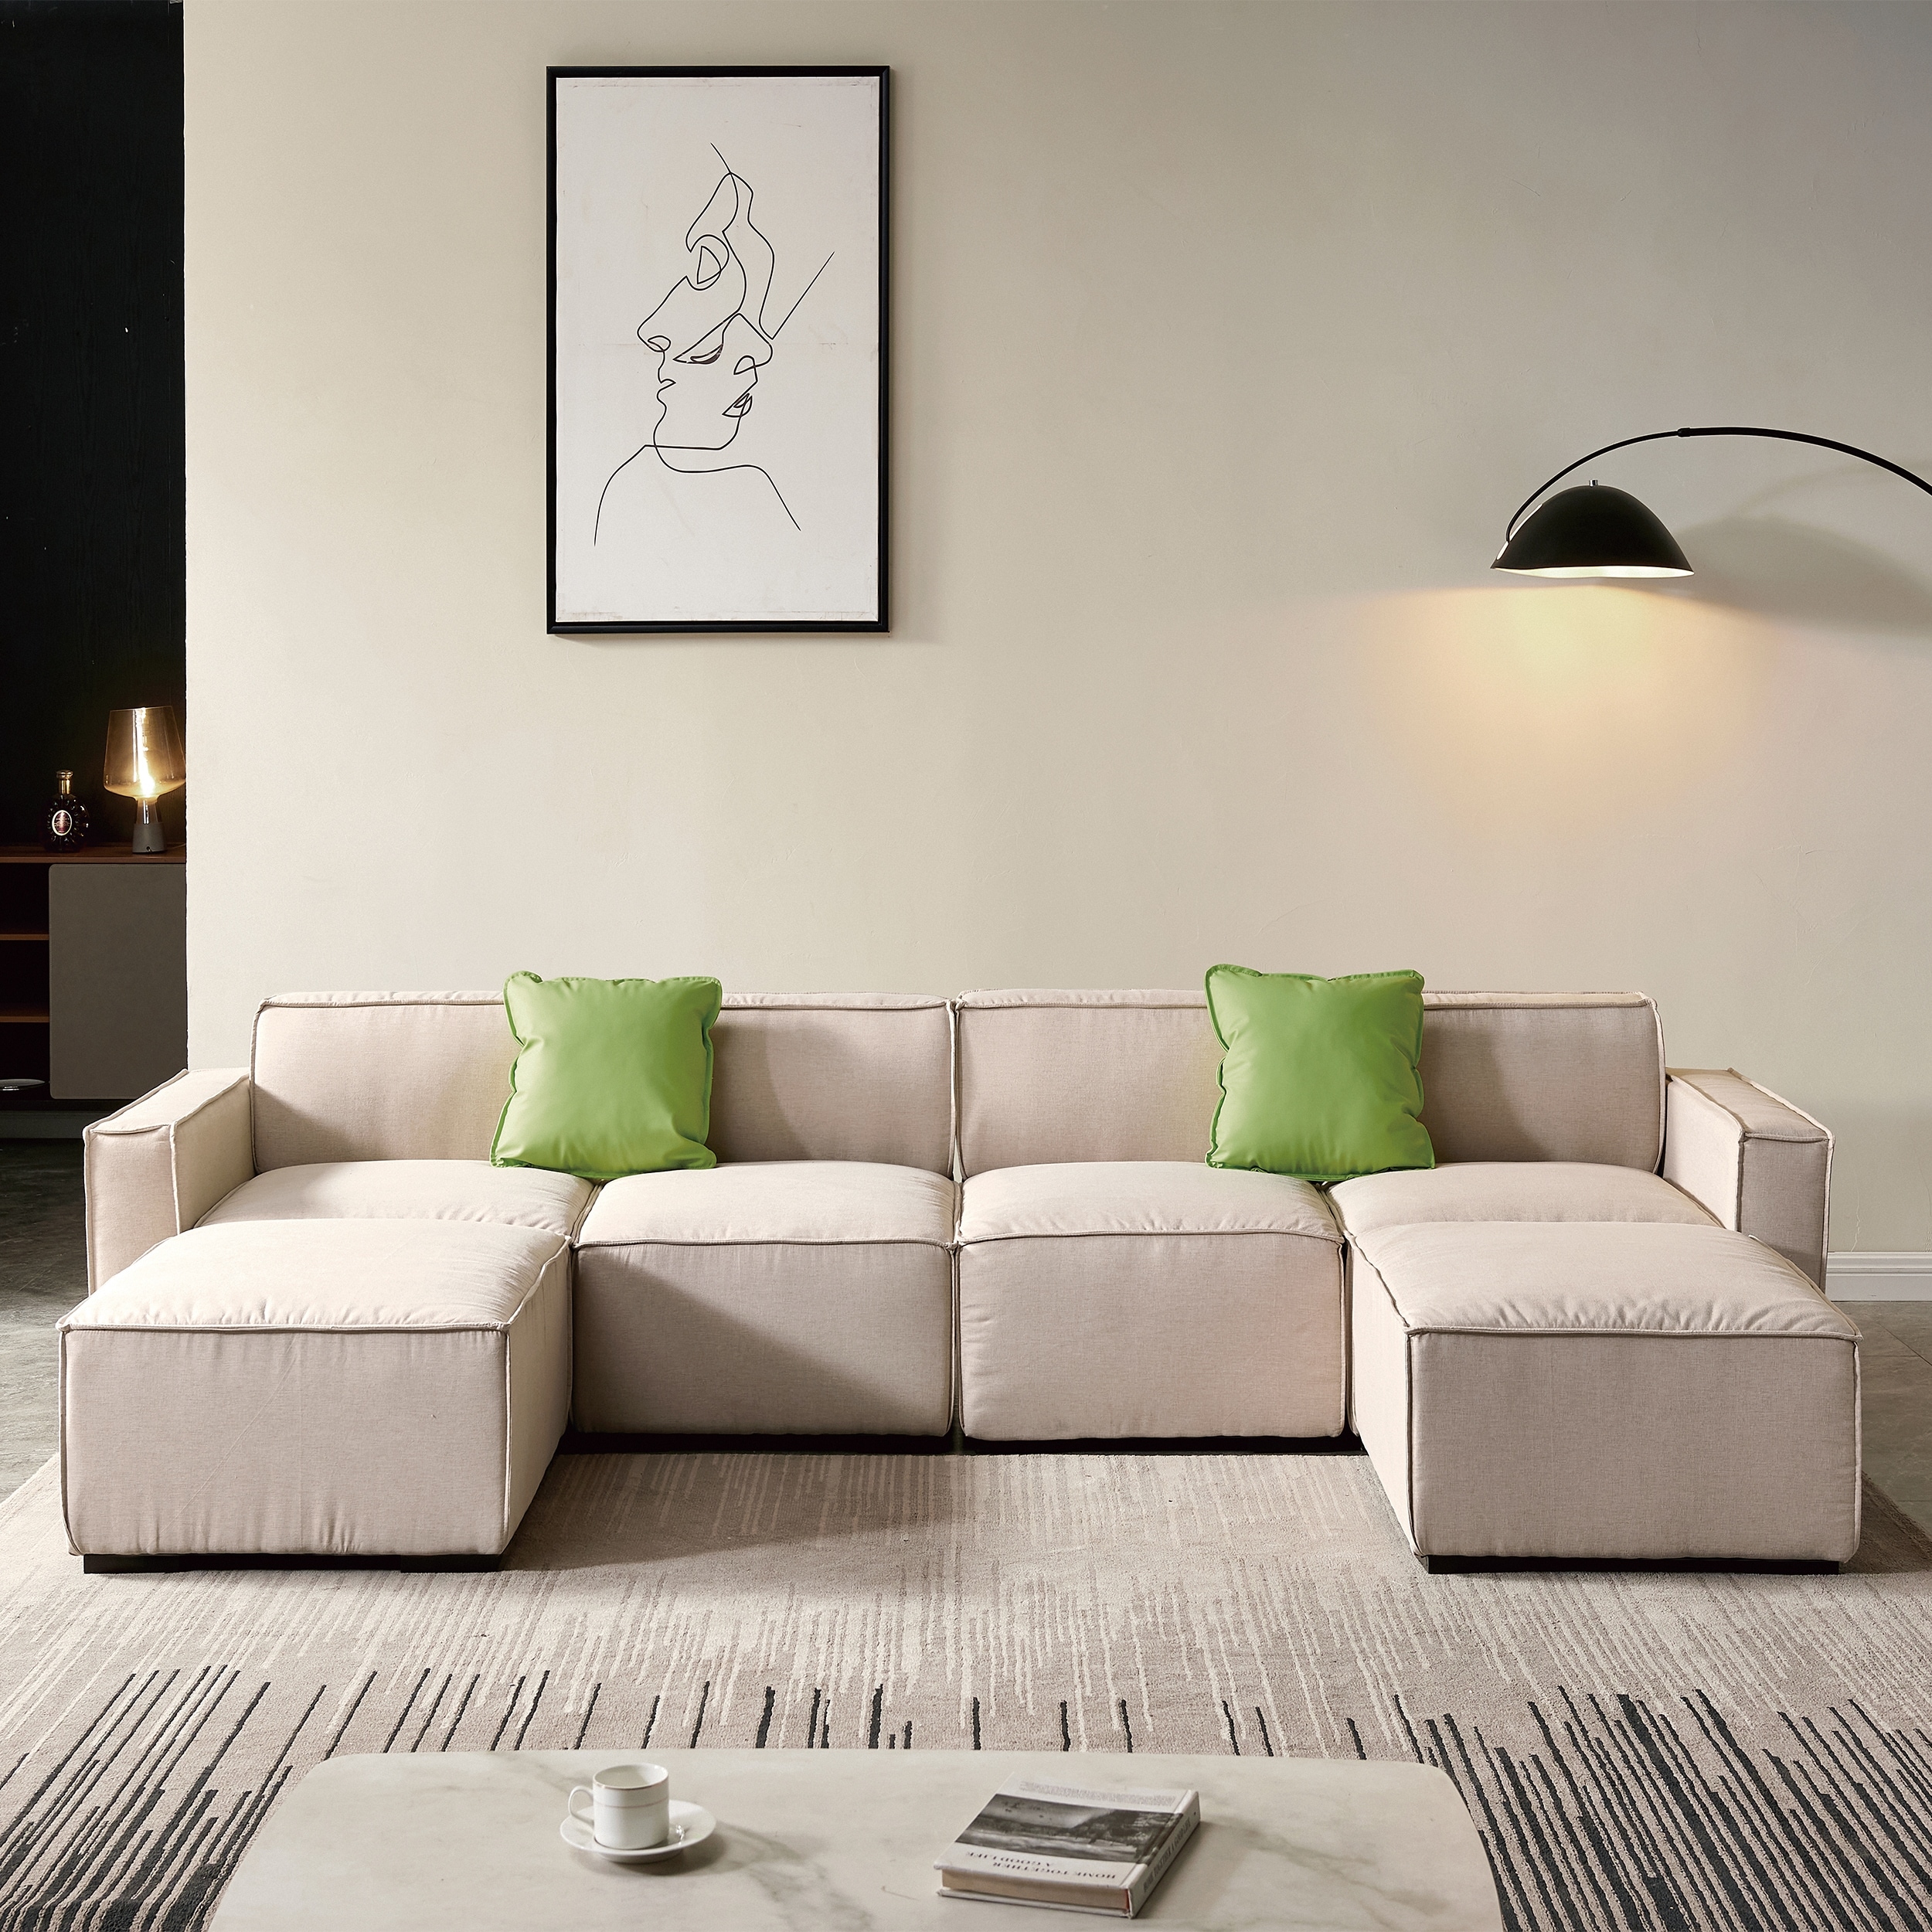 Modular U-Shaped Sectional Fabric Couch Sectional Sofas with Two Ottomans- 6 Seat Upholstered Sofa Couch for Living Room